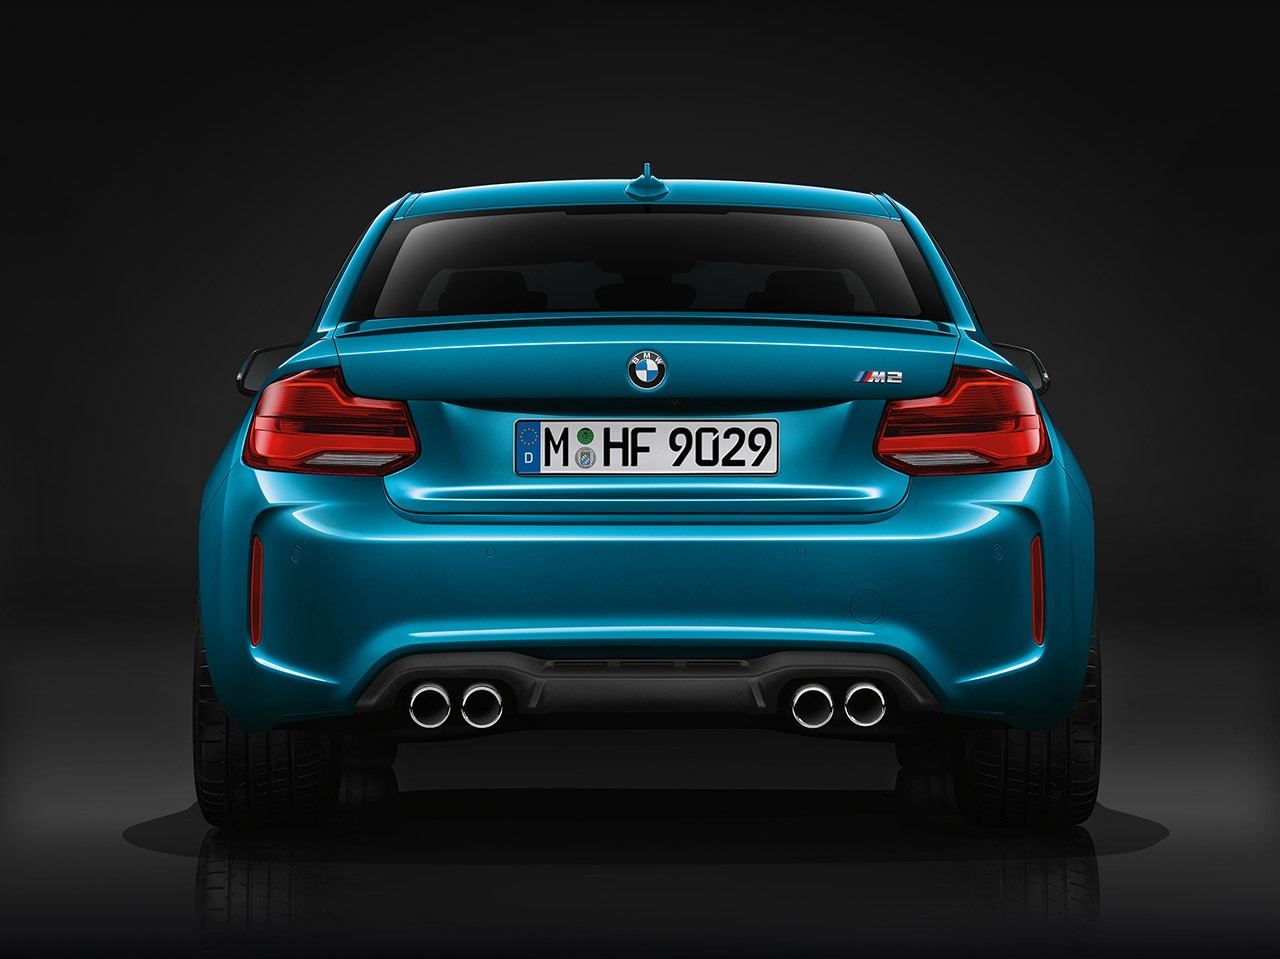 2018 BMW 2 Series rearview